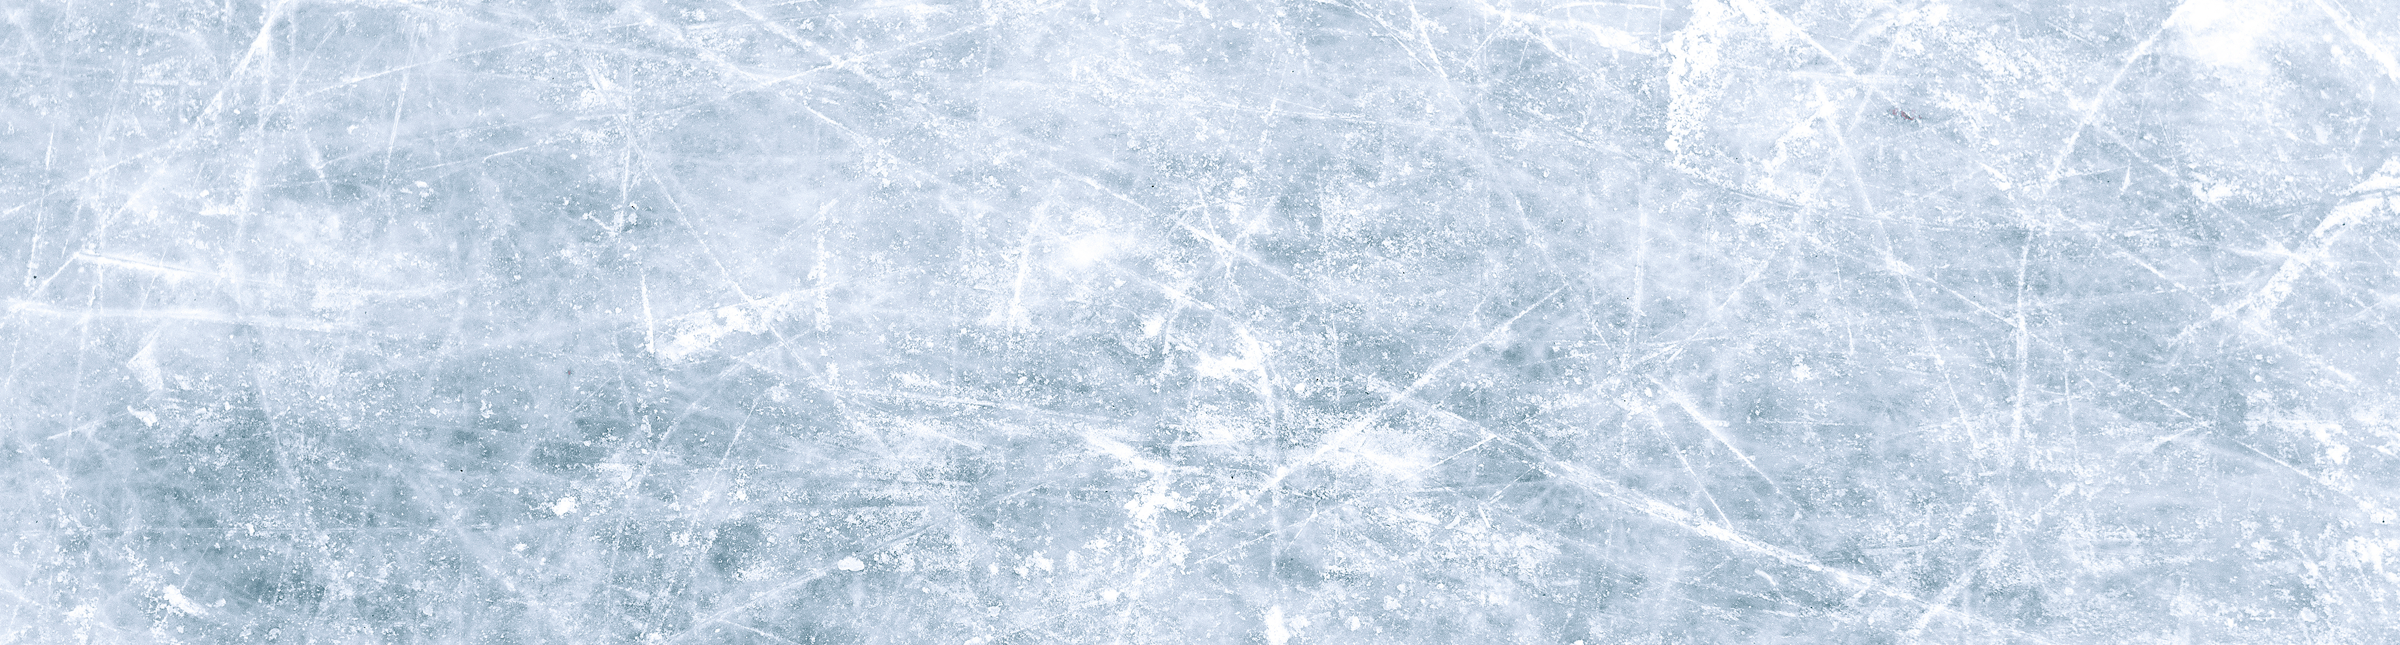 Natural scratched ice at the ice rink